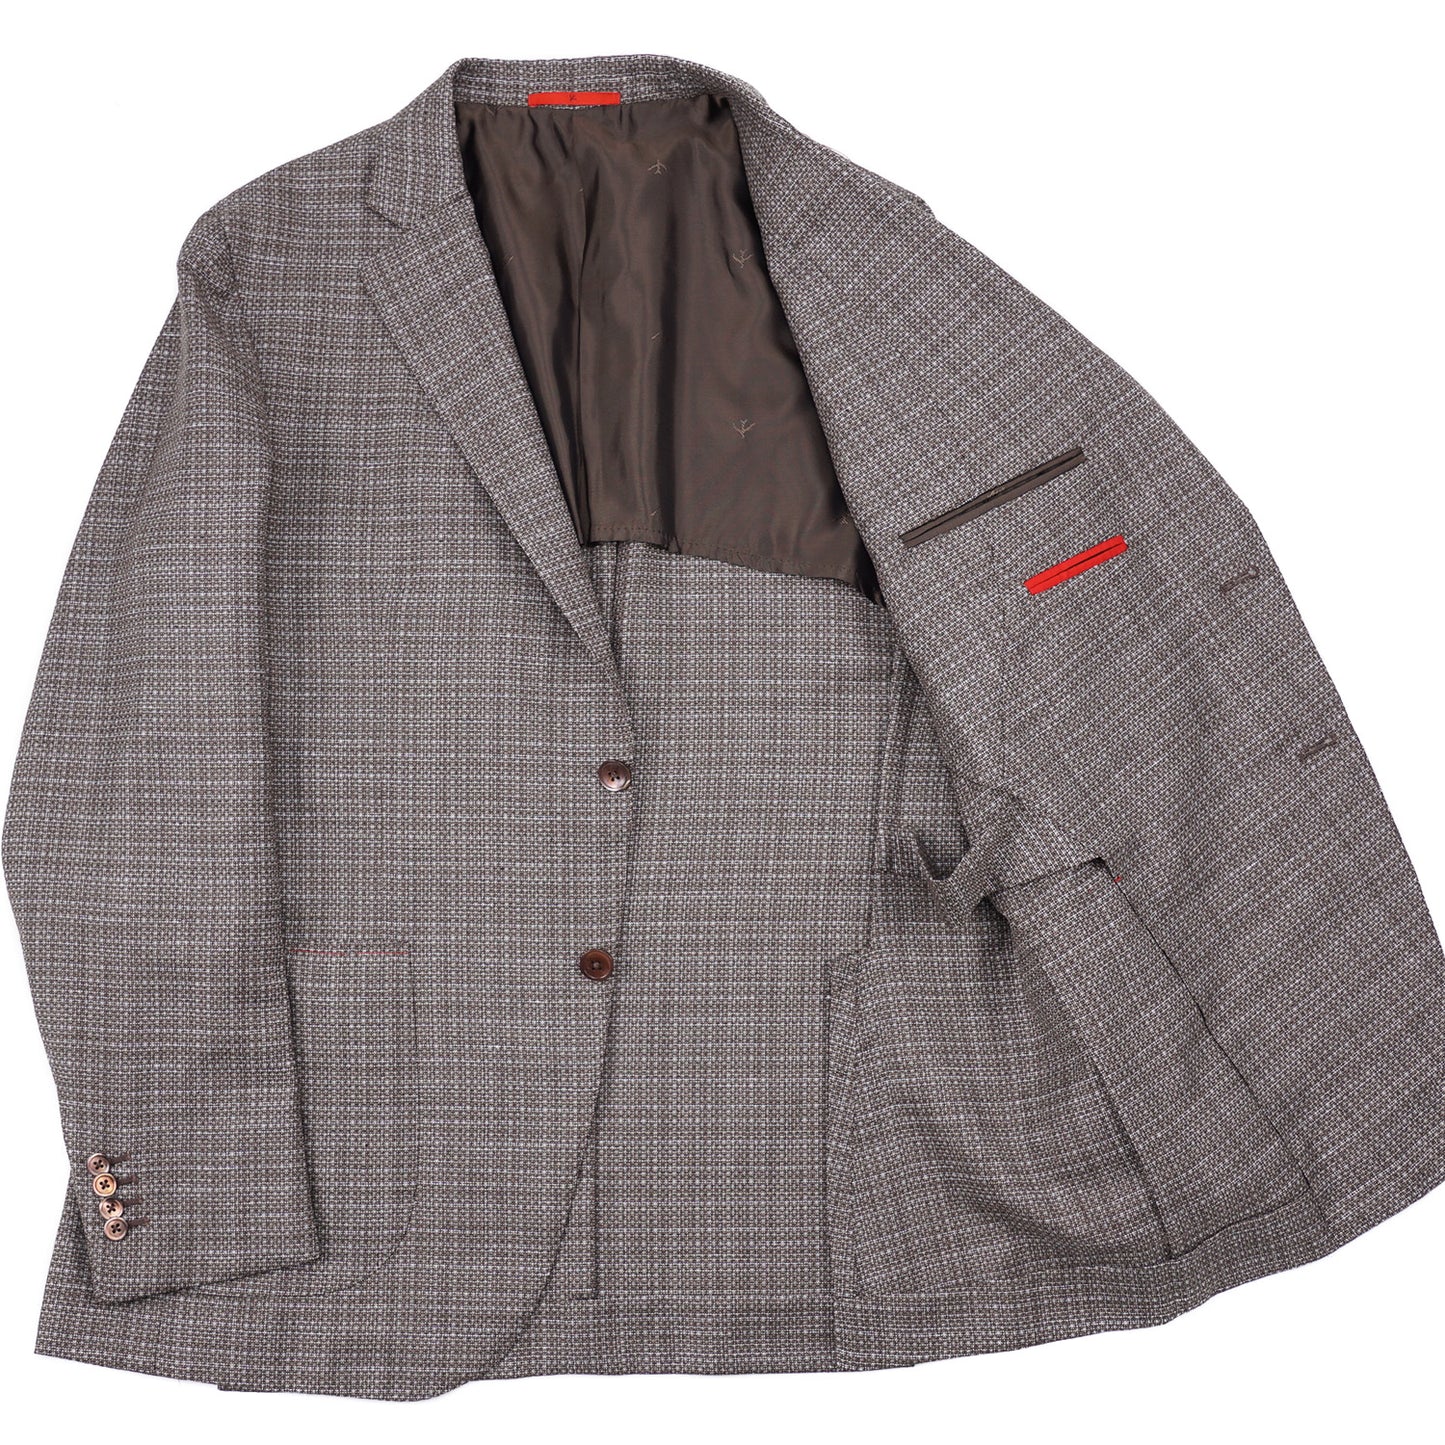 Isaia Slim-Fit Wool and Linen Sport Coat - Top Shelf Apparel